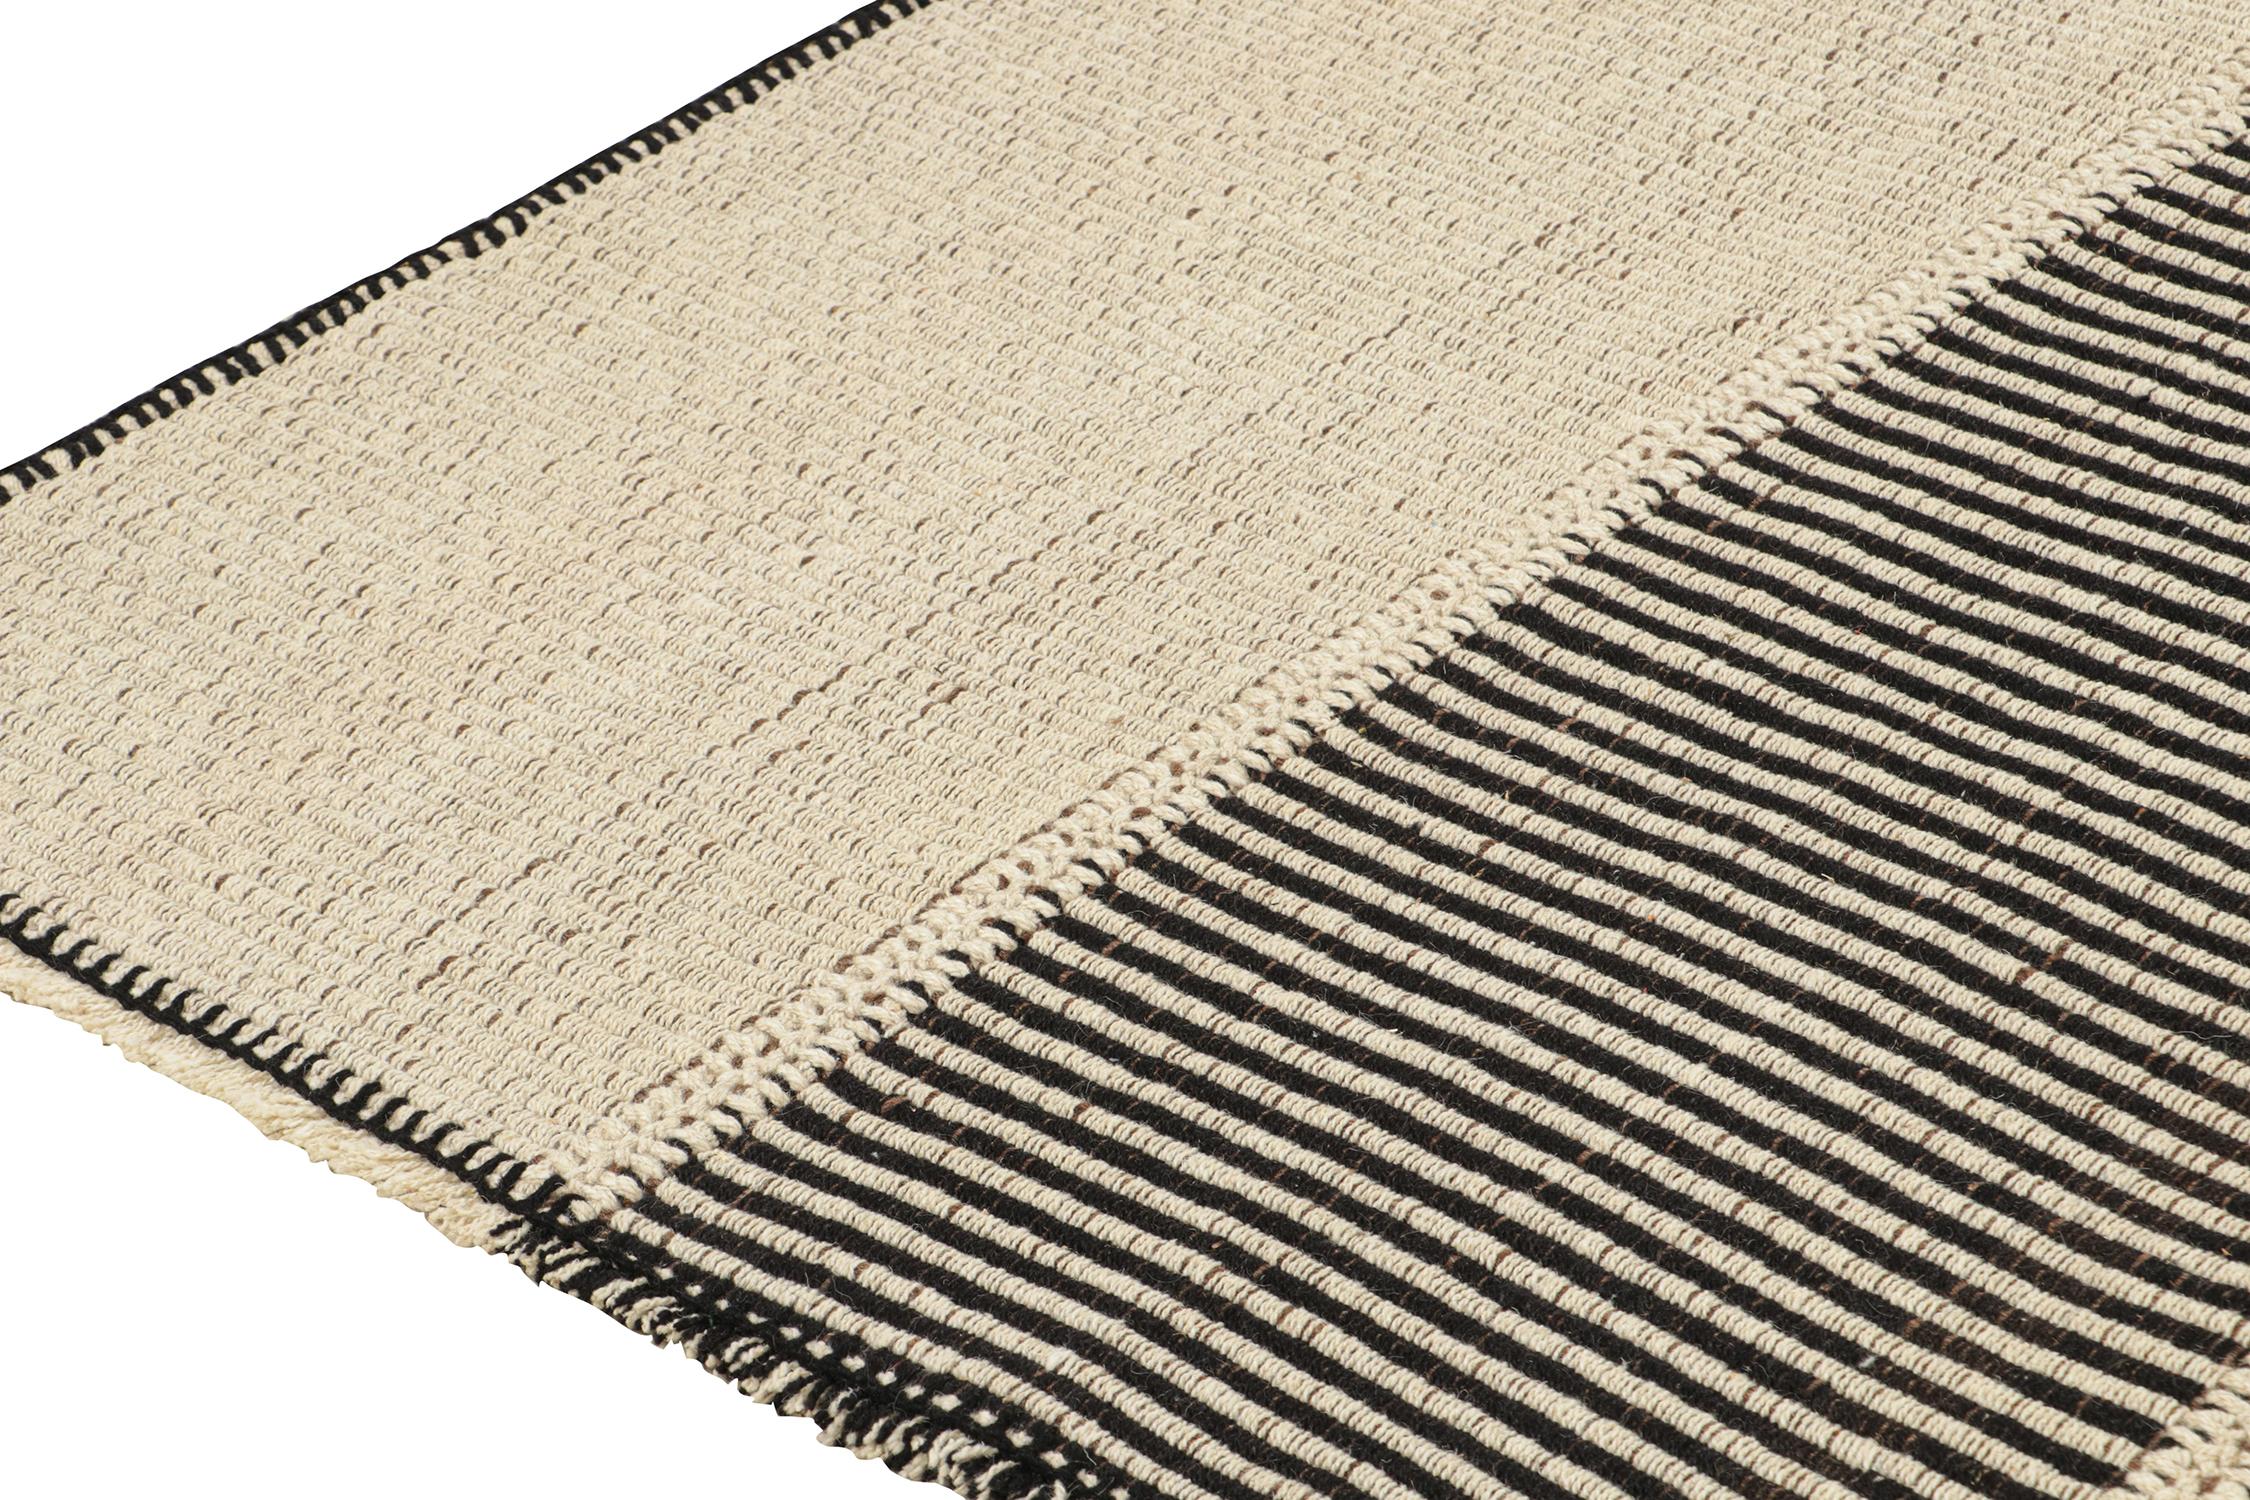 Hand-Knotted Rug & Kilim’s Custom Kilim Design with Beige-Brown, Black and Off-White Stripes For Sale